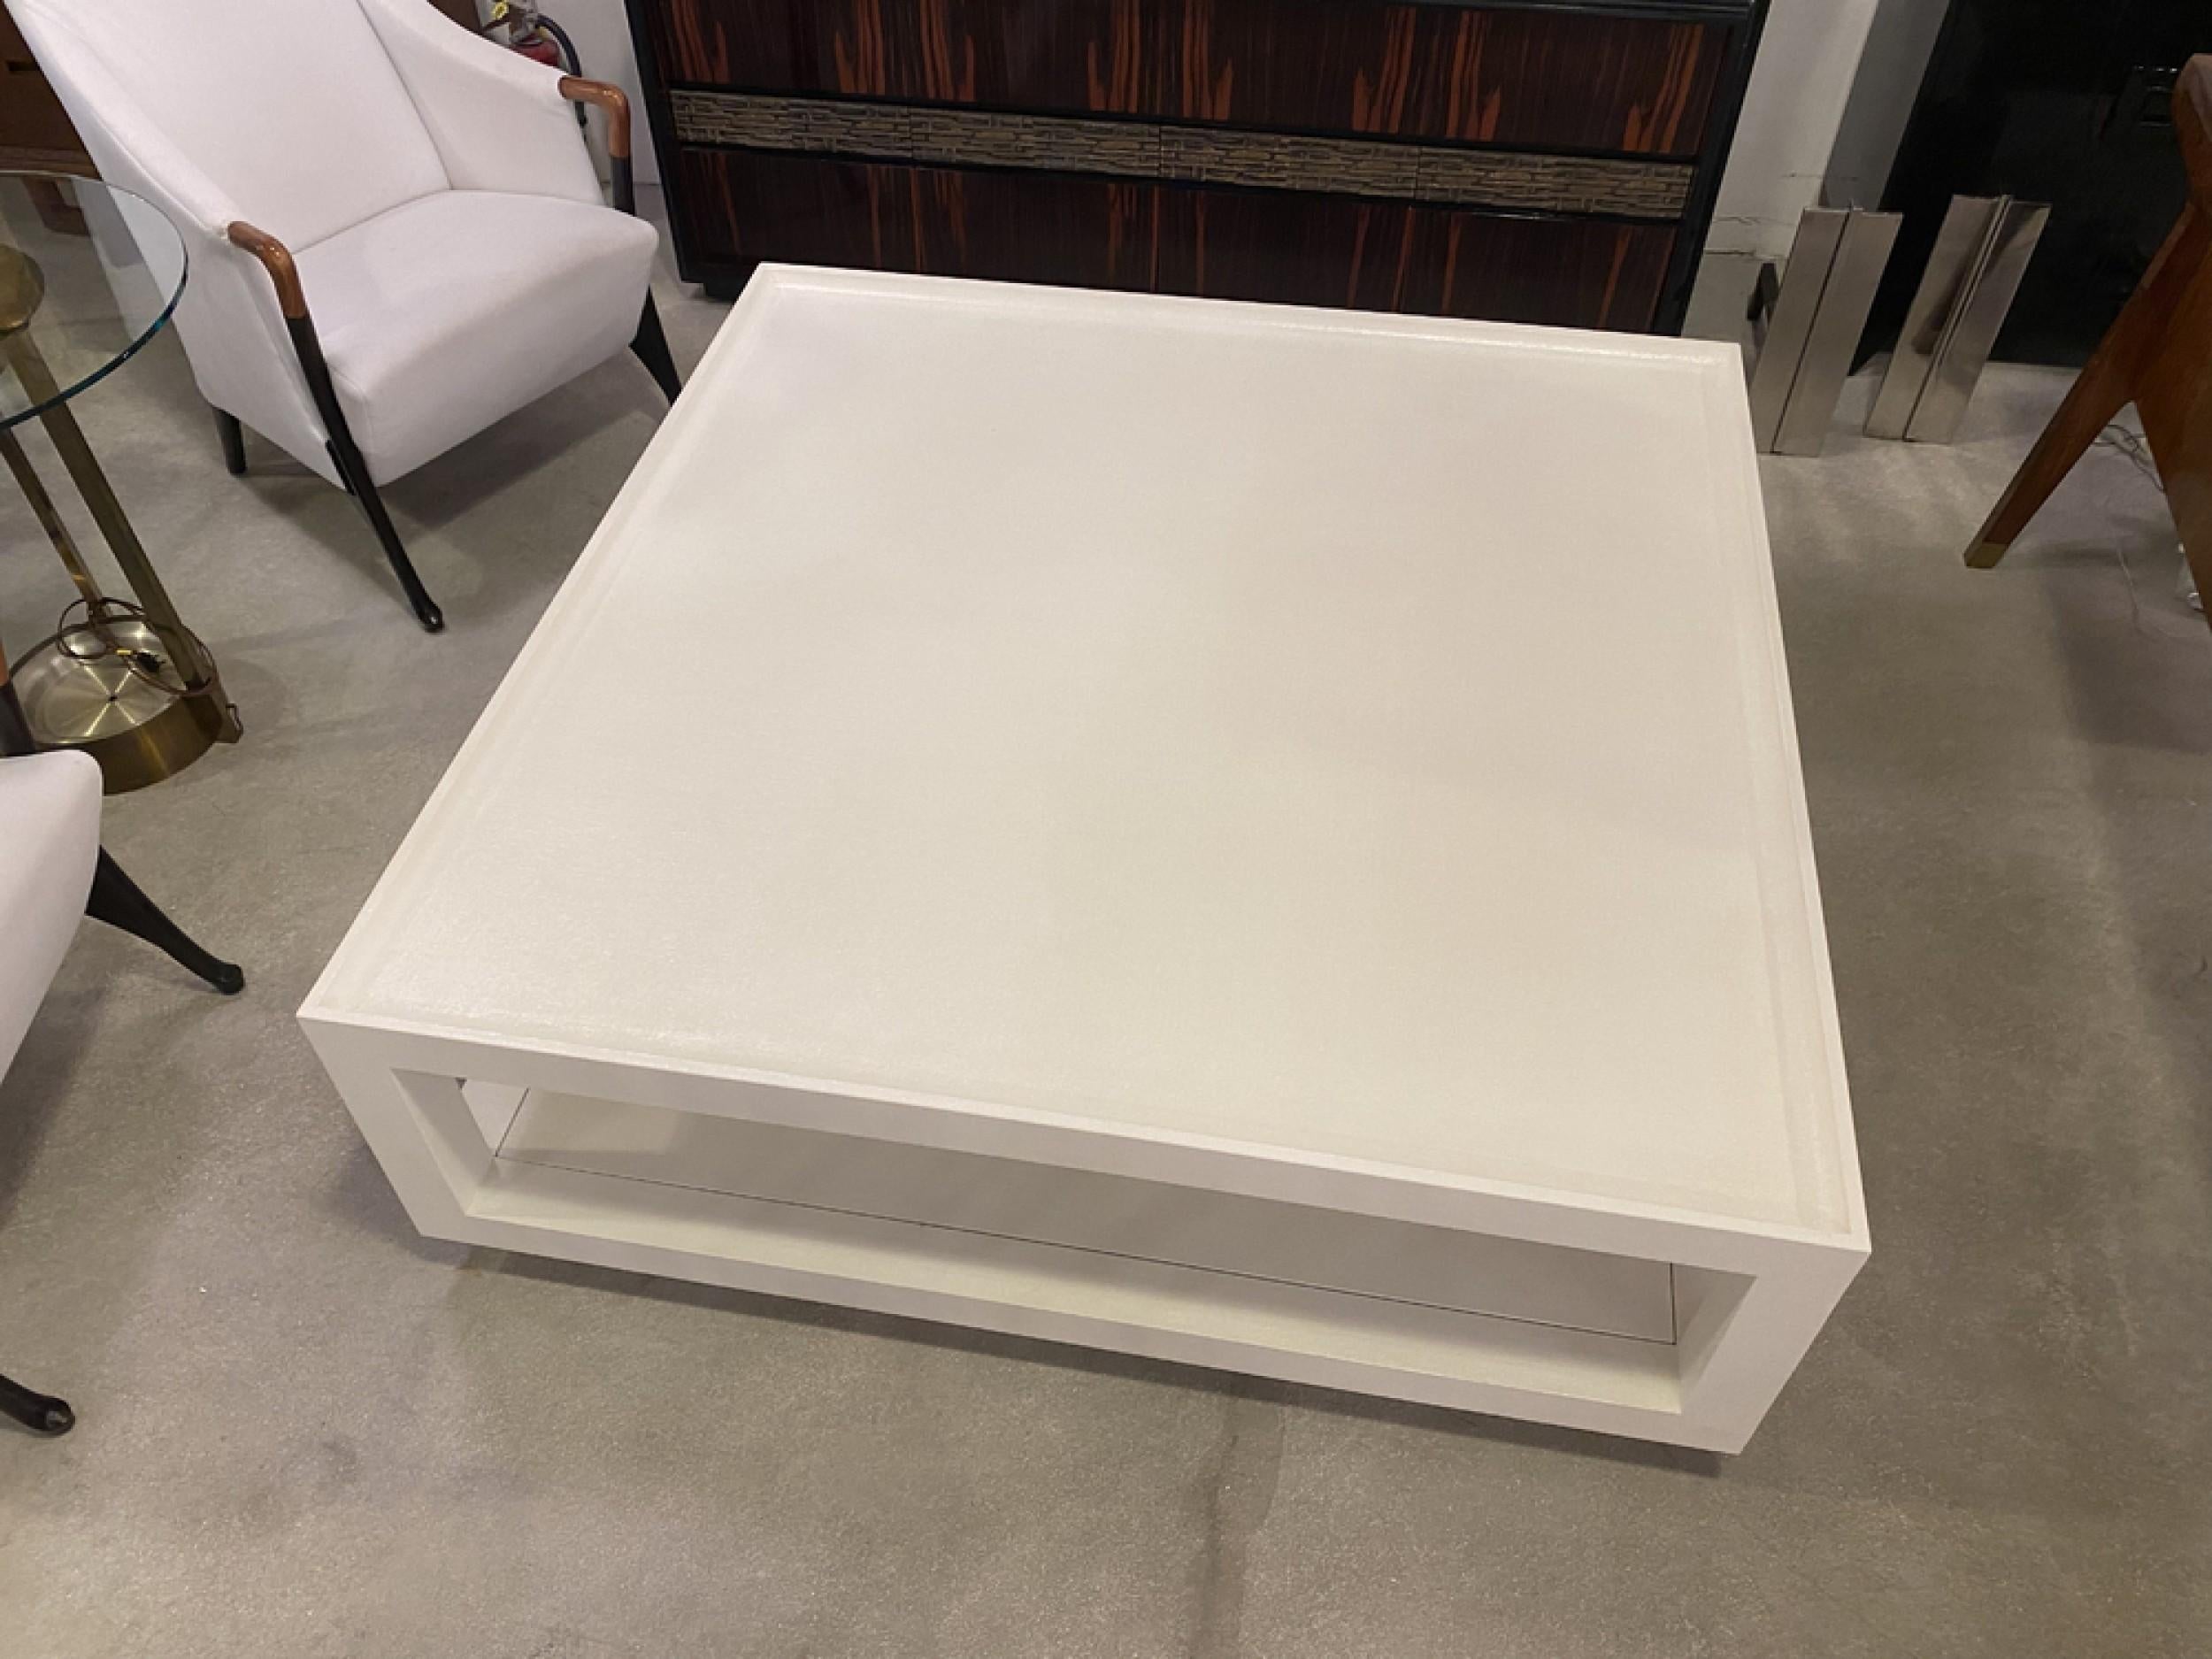 Karl Springer Midcentury American Modern Tray Top Coffee Table In Good Condition For Sale In New York, NY